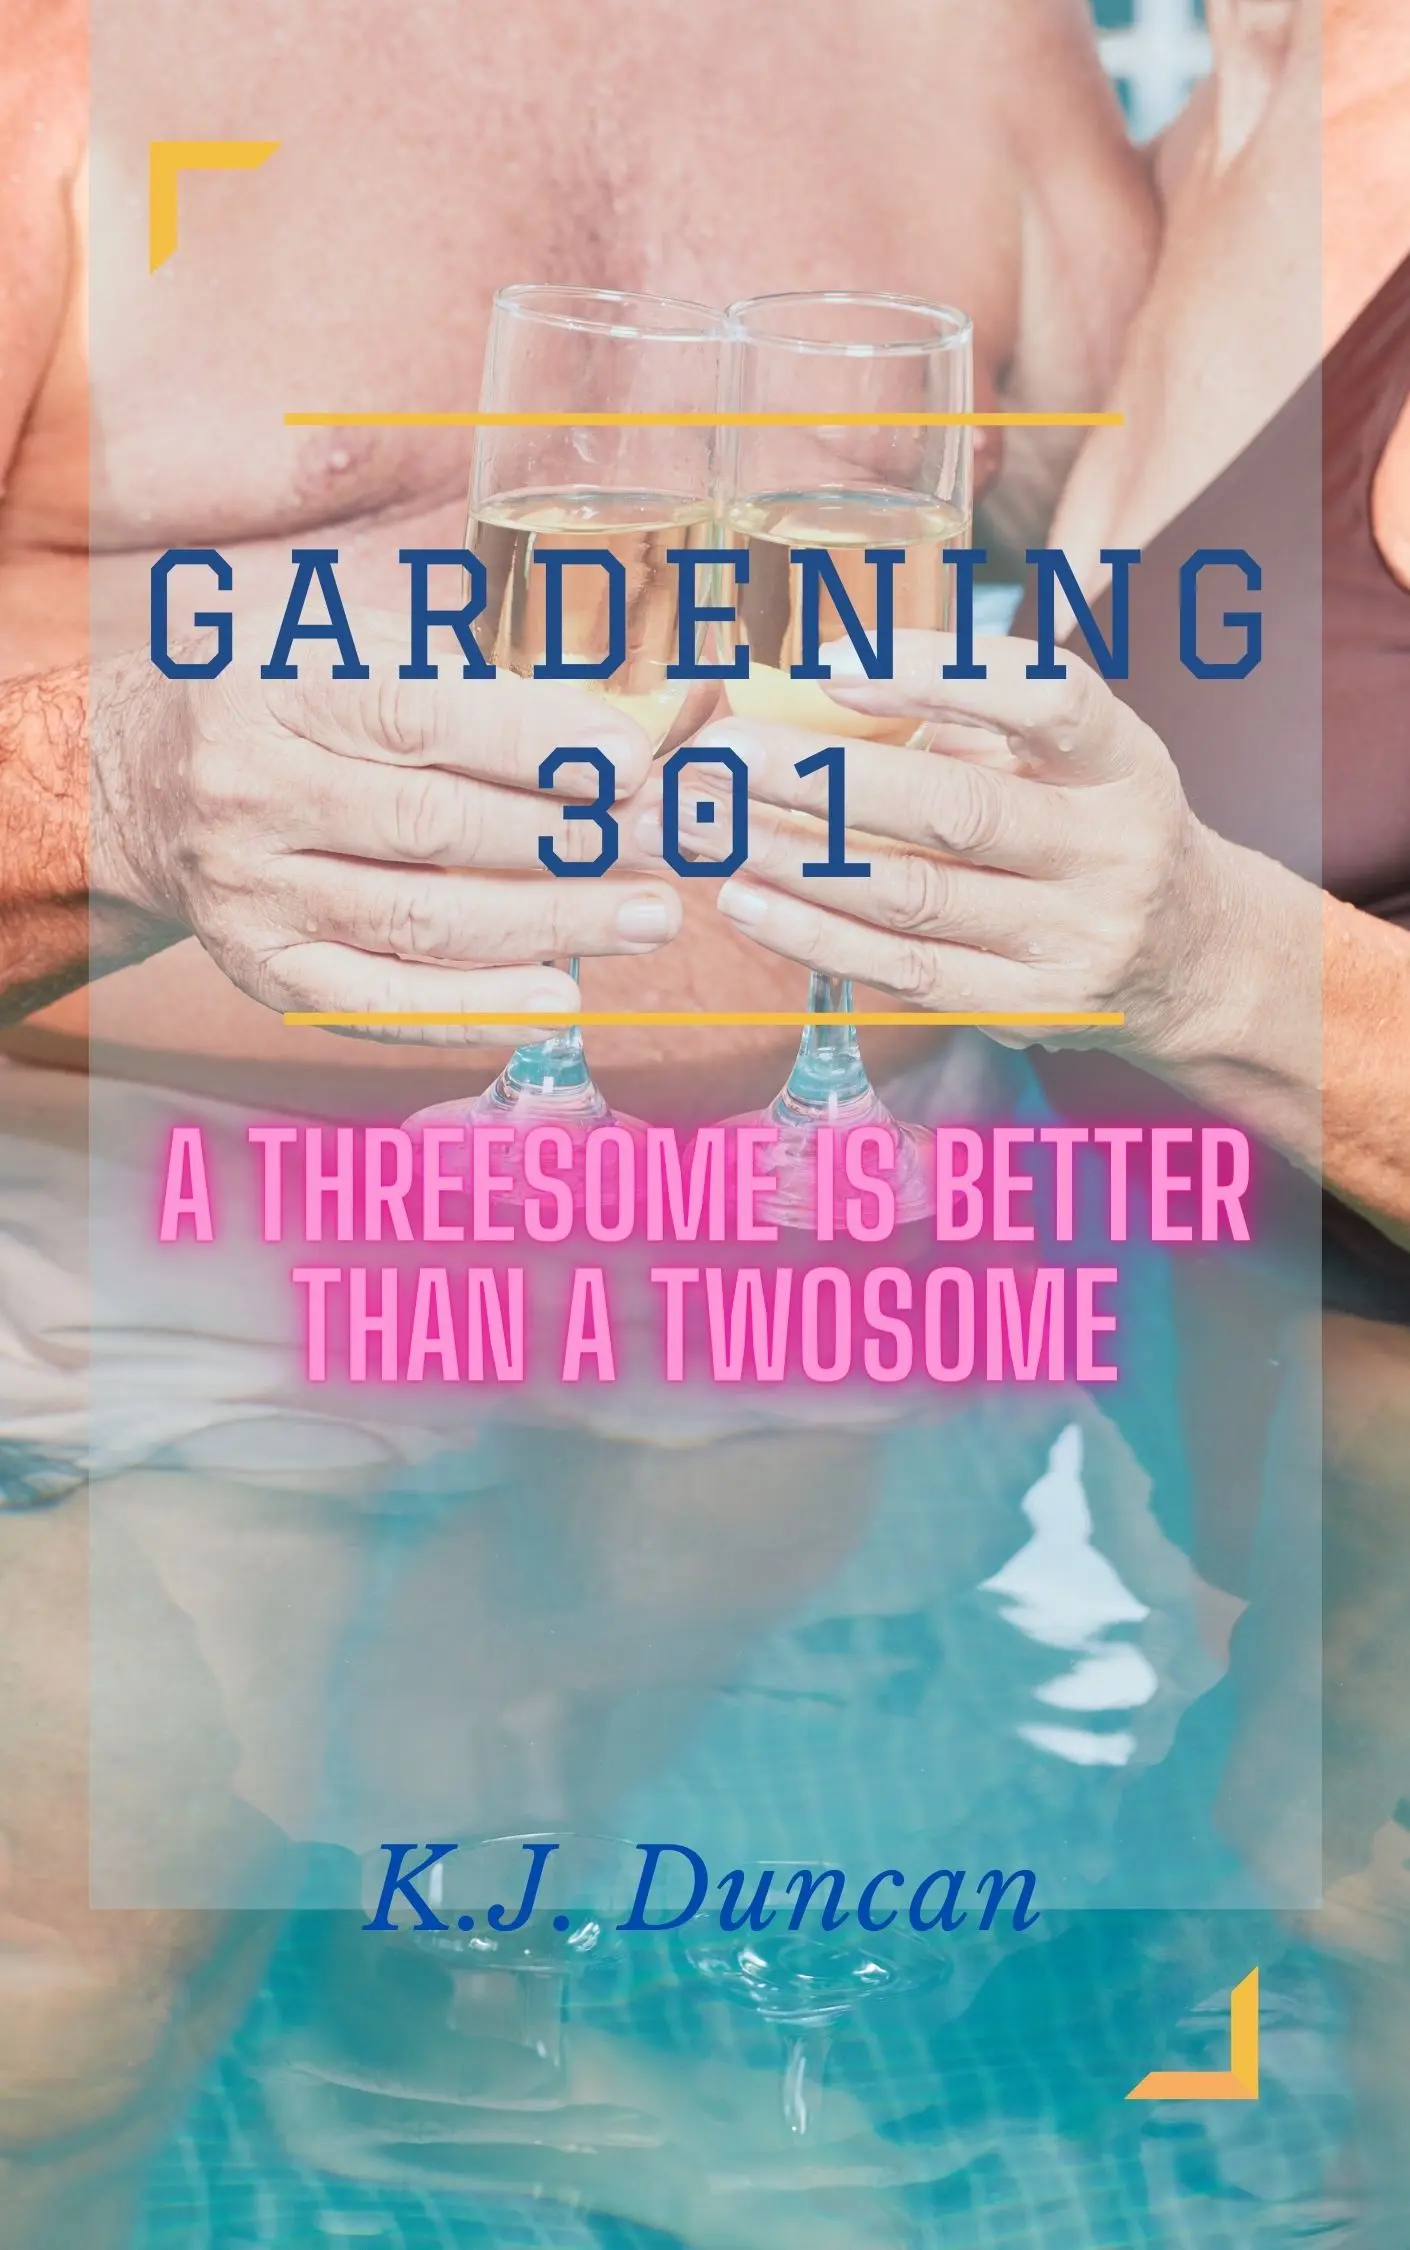 Gardening 301: A Threesome is better than a Twosome older couple on book cover